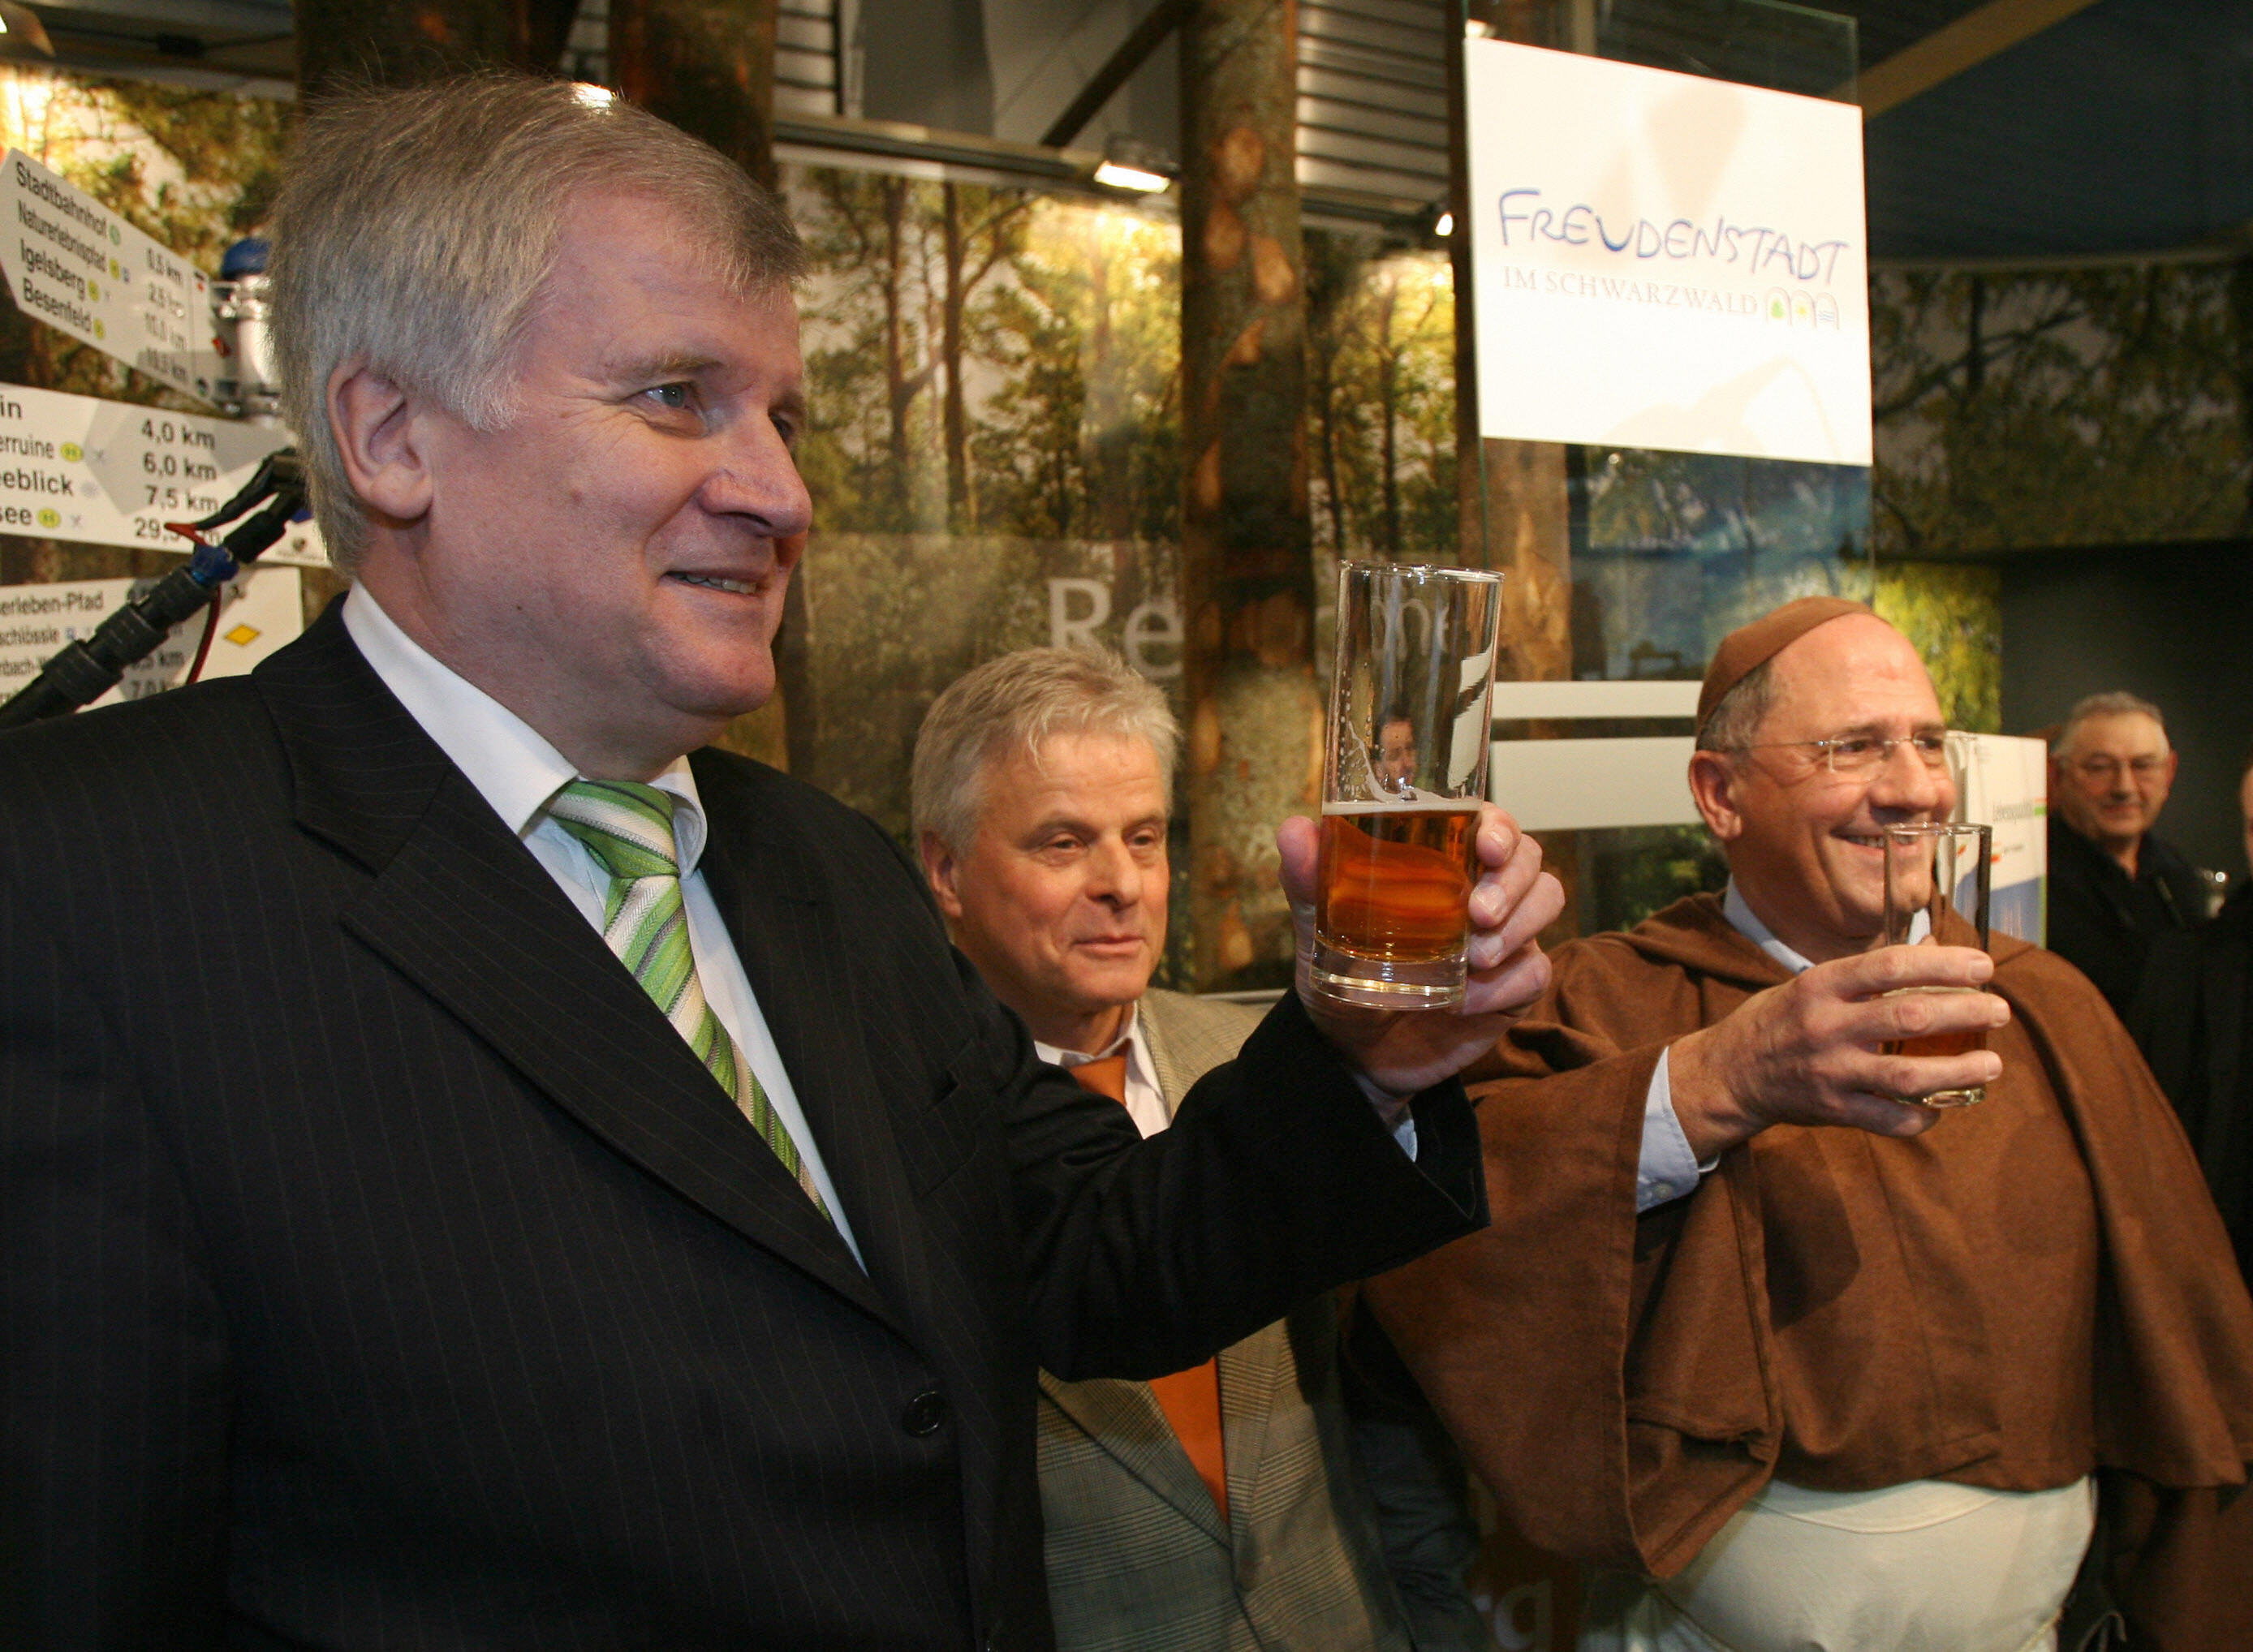 German Consumer Protection, Food and Agriculture Minister Horst Seehofer (L) holds his glass of beer up as he drinks with an employee dressed as a monk at the German Agriculture Ministry's stand of the "Gruene Woche" international food and agriculture fair in Berlin 17 January 2008. (JOHN MACDOUGALL/AFP/Getty Images)